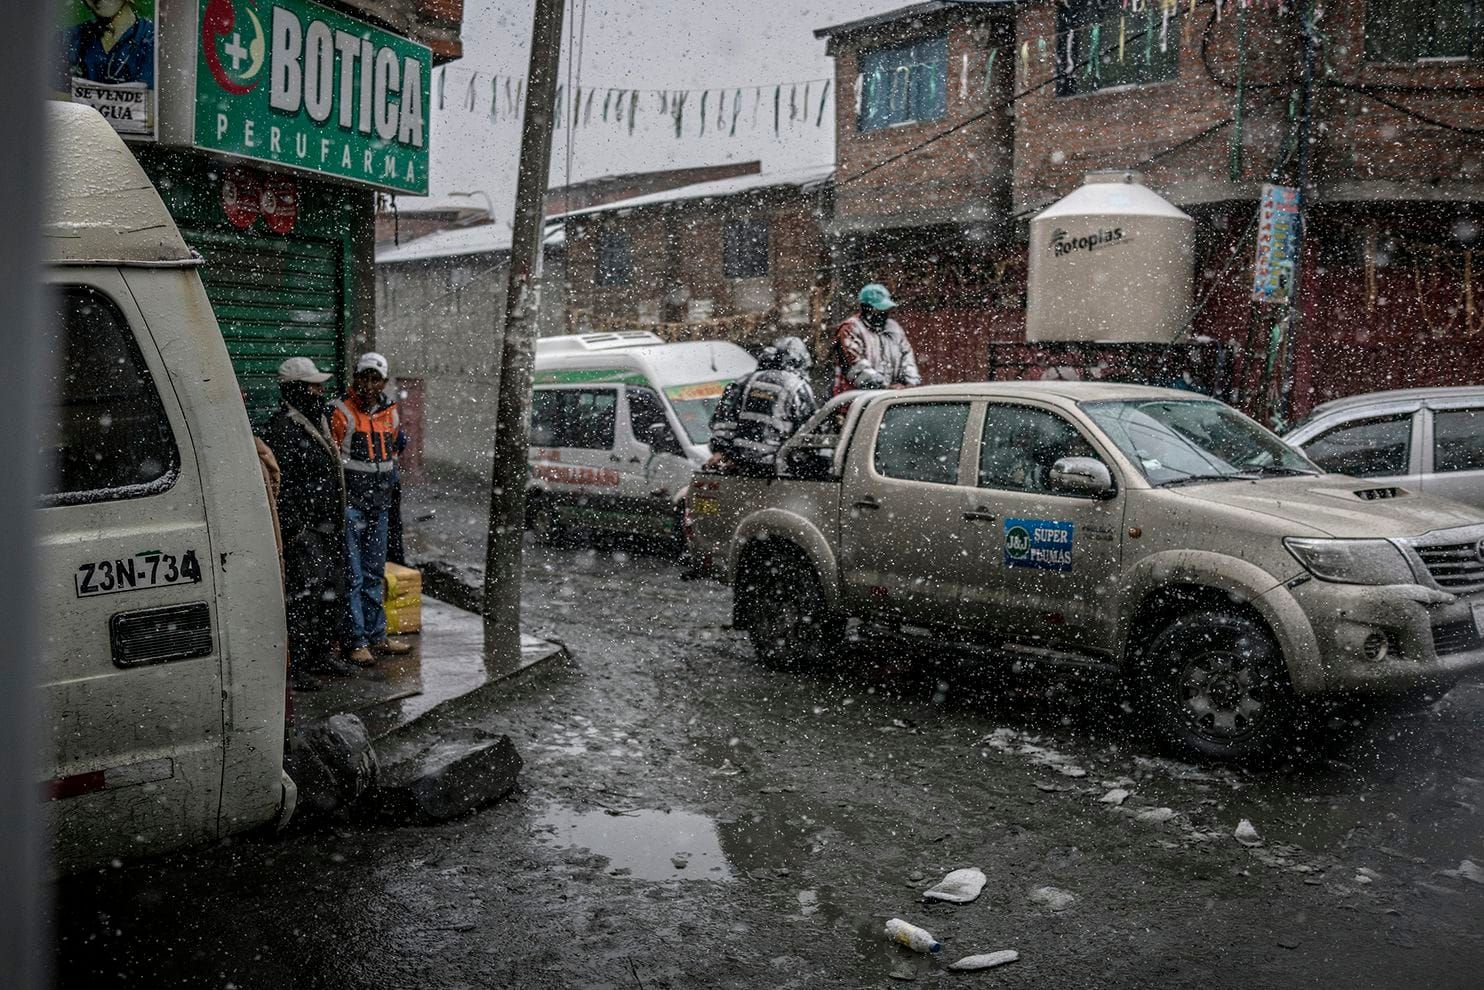 Miners brave snow in the back of a truck on the streets of La Rinconada, a gold-mining town in the Peruvian Andes. Peru, 2019. Image by James Whitlow Delano.